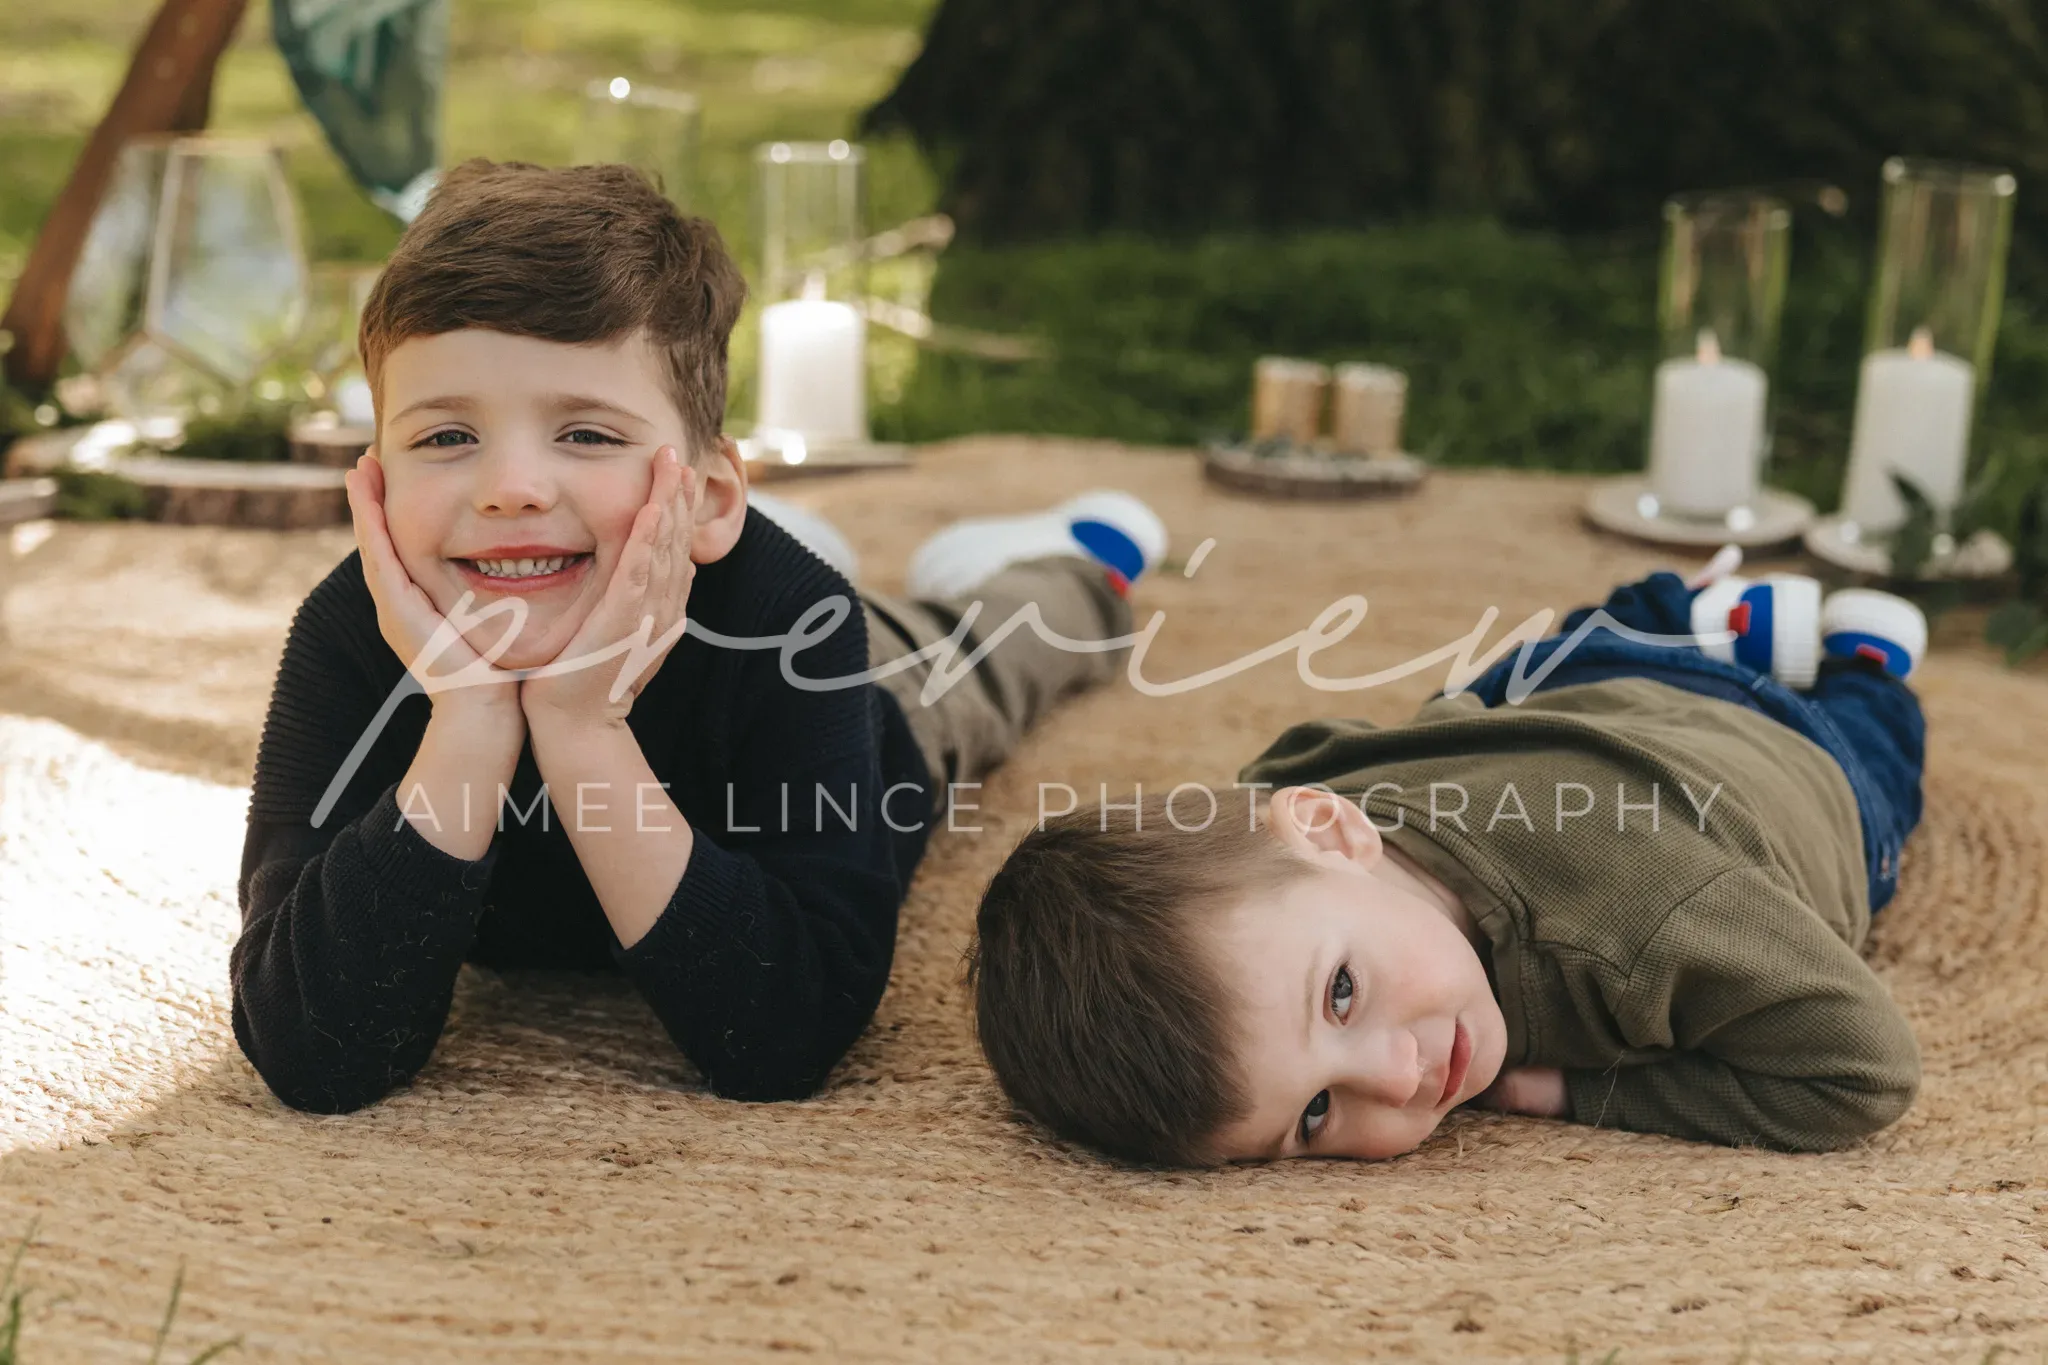 Two young boys lying on a blanket in a park, smiling at the camera. one boy has his chin resting on his hands, and the other boy is laying his head on the blanket, cheek pressed down. candles and lanterns are around them.